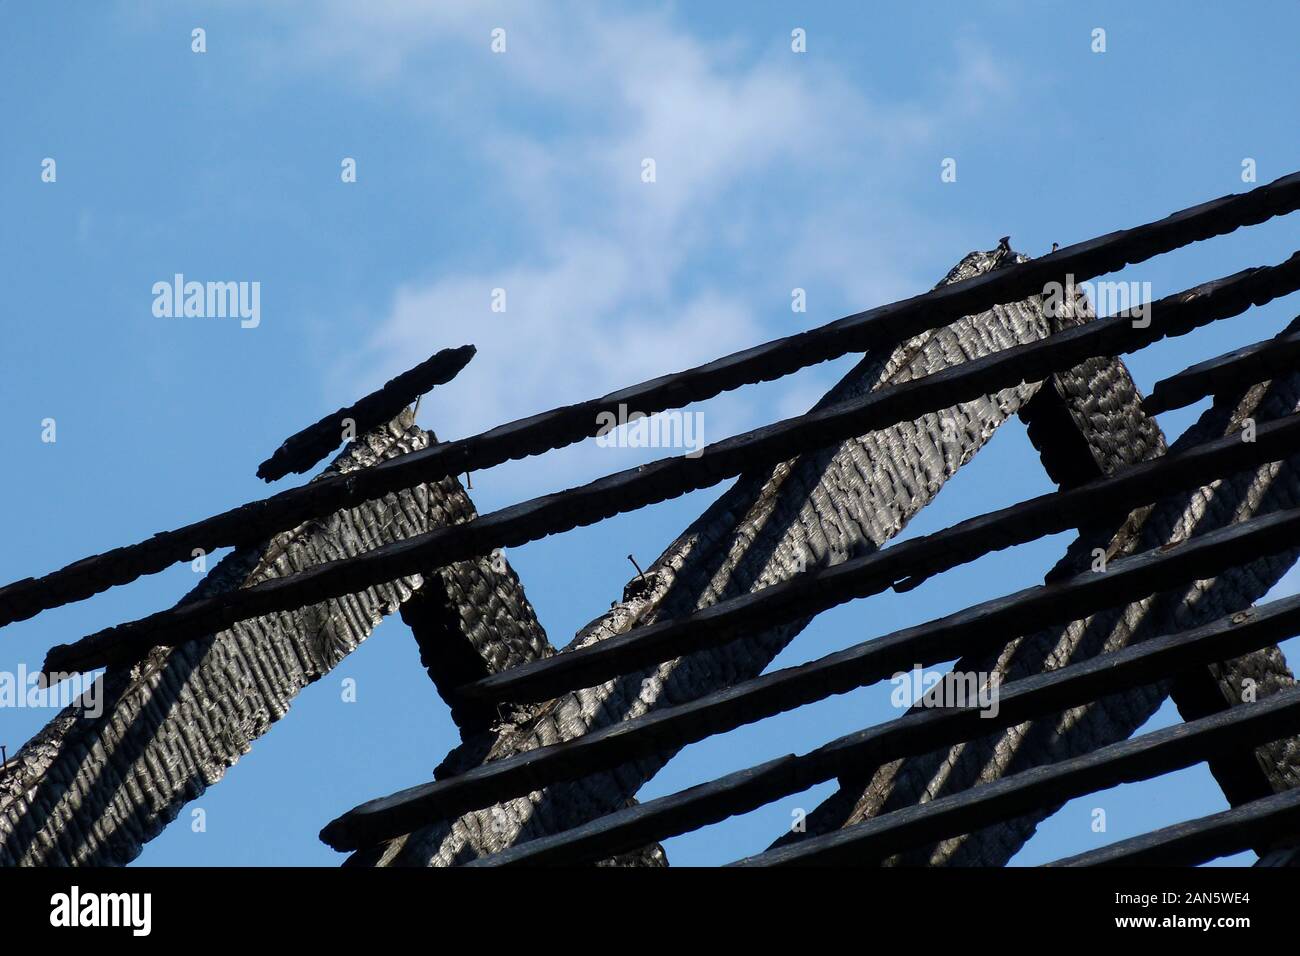 damaged exposed charred burnt black timber roof structure after house fire. abstract view of rafters under blue sky. fire safety and insurance concept Stock Photo